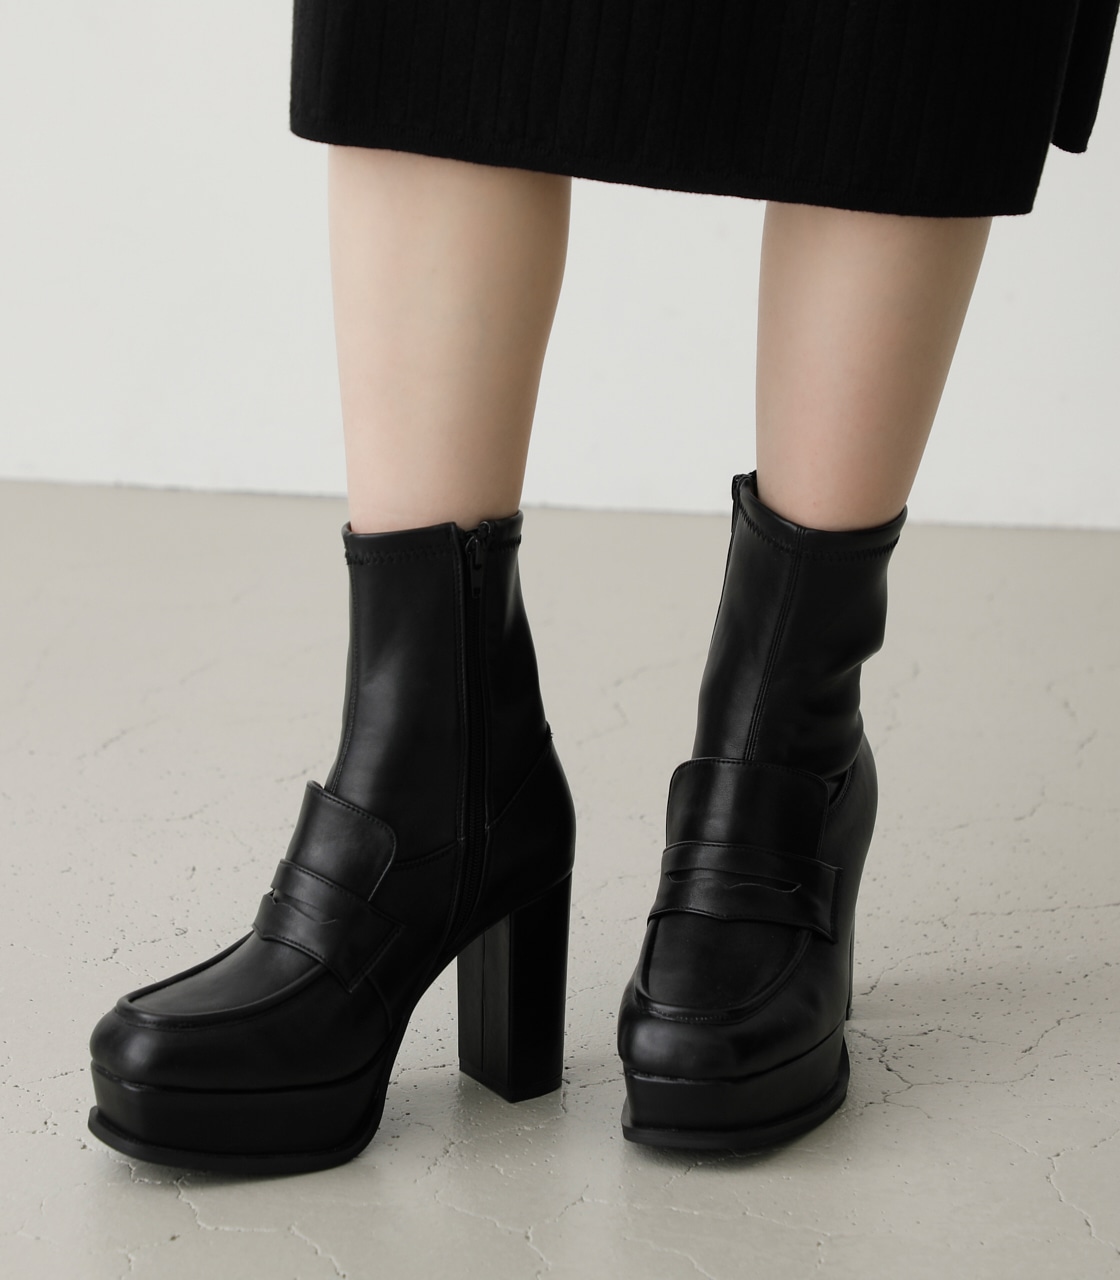 LOAFER BOOTS/ローファーブーツ 詳細画像 BLK 7